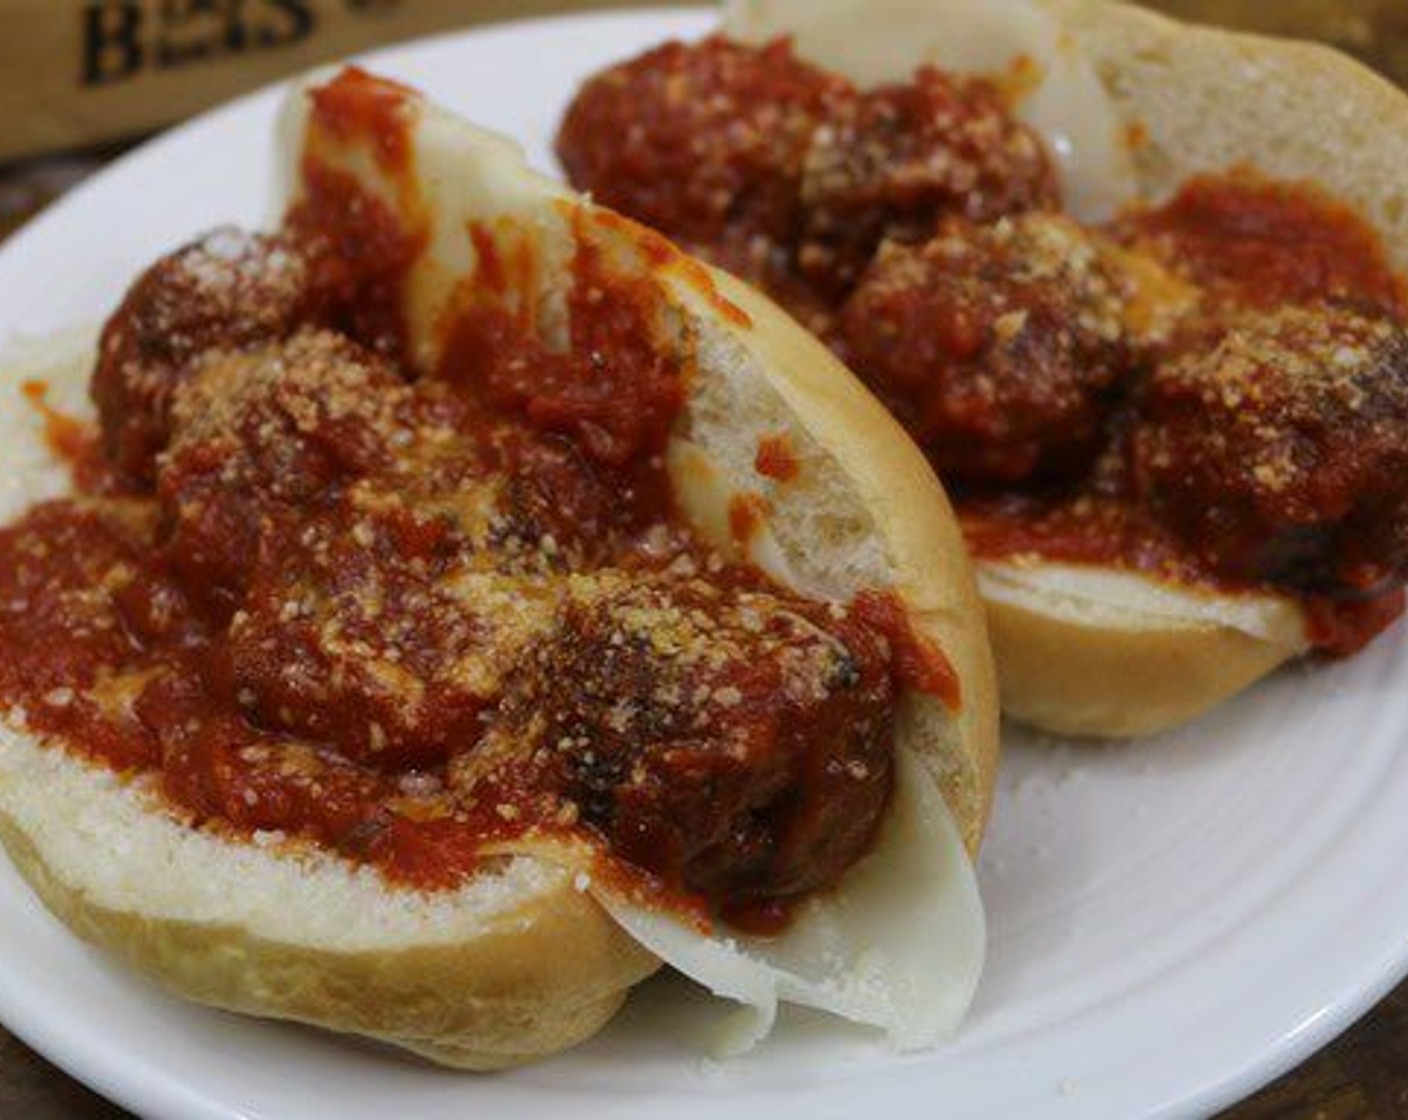 step 7 Use mini sub rolls and thin sliced provolone cheese, then add your meatballs and sauce and top with a little extra provolone cheese.